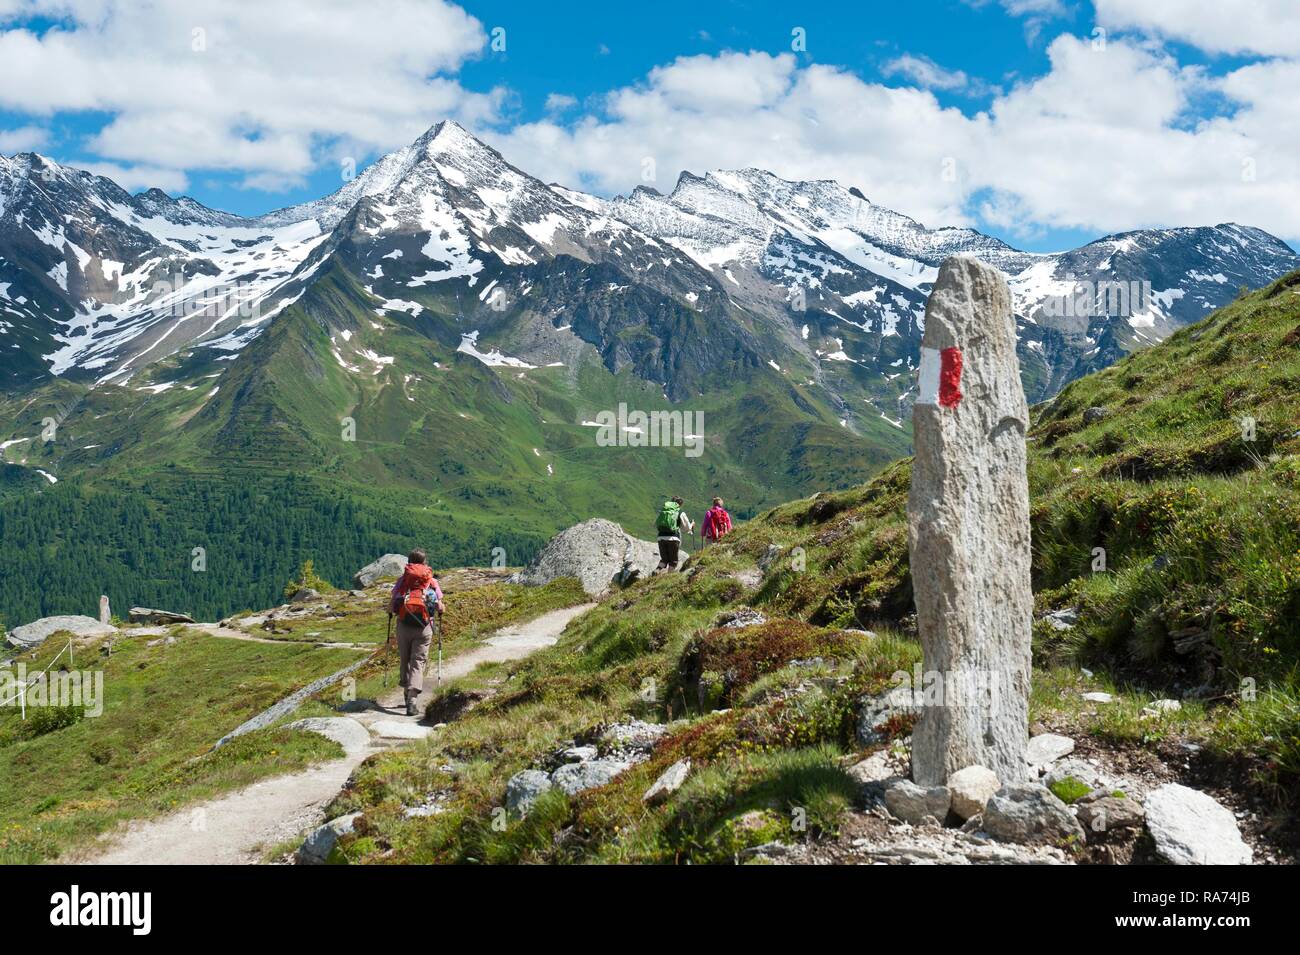 Three hikers on hiking trail, red and white markings on stone, snow-covered mountains, near the Waldner Alm, Kasern, Casere Stock Photo